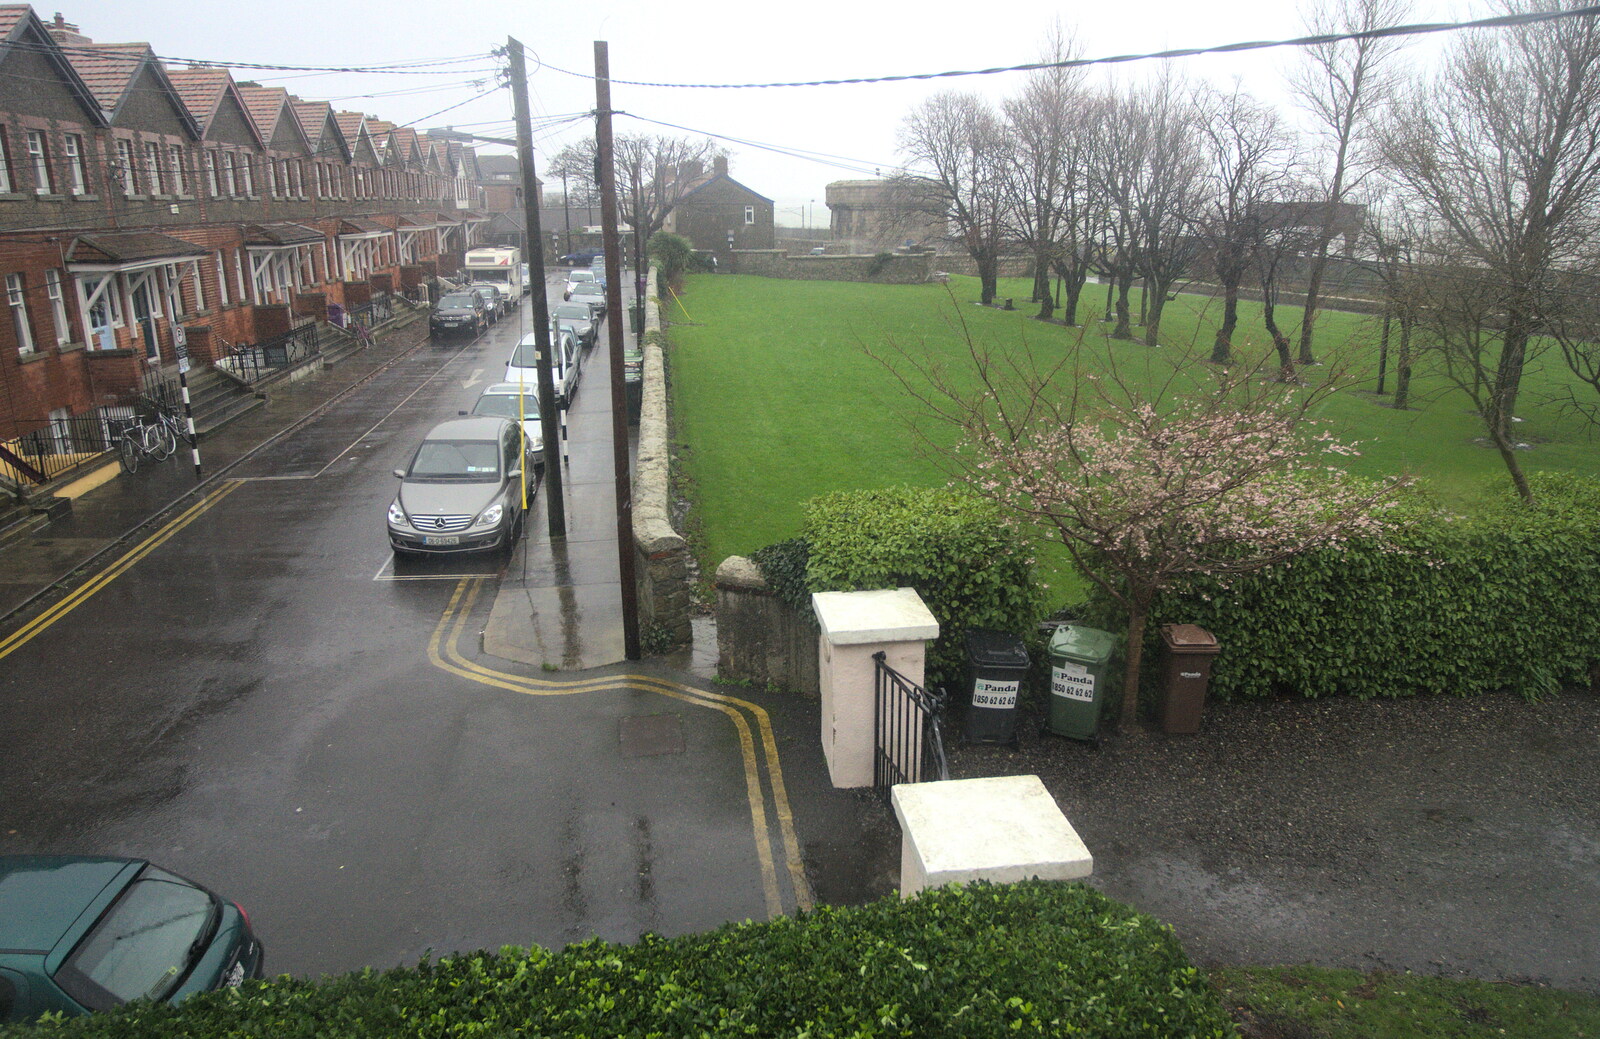 A rainy view out of the window from Christmas in Blackrock and St. Stephen's in Ballybrack, Dublin, Ireland - 25th December 2015